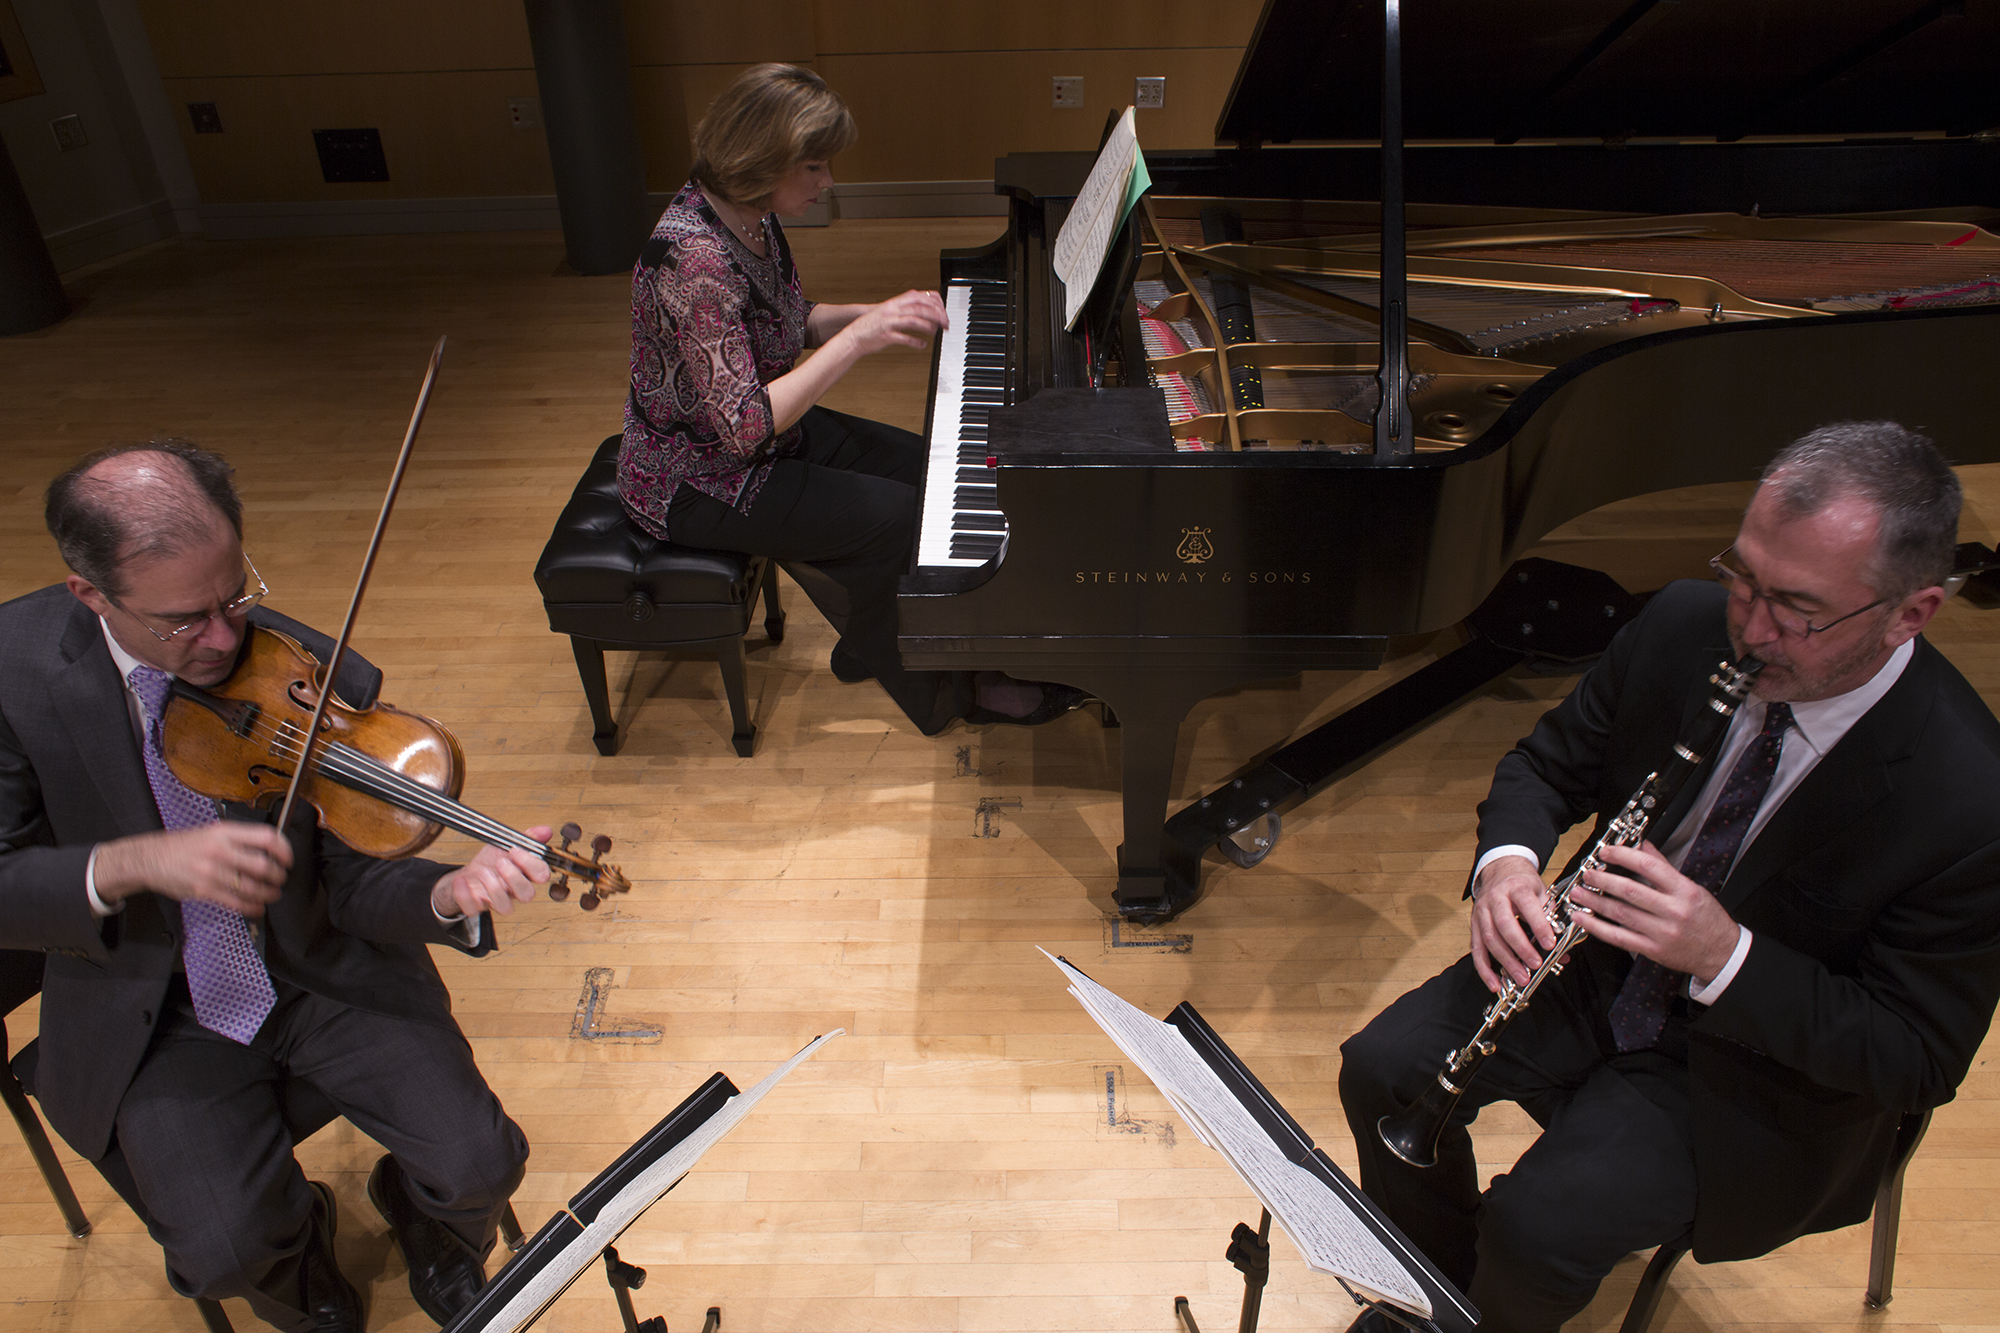 Musicians perform on violin, clarinet, and piano